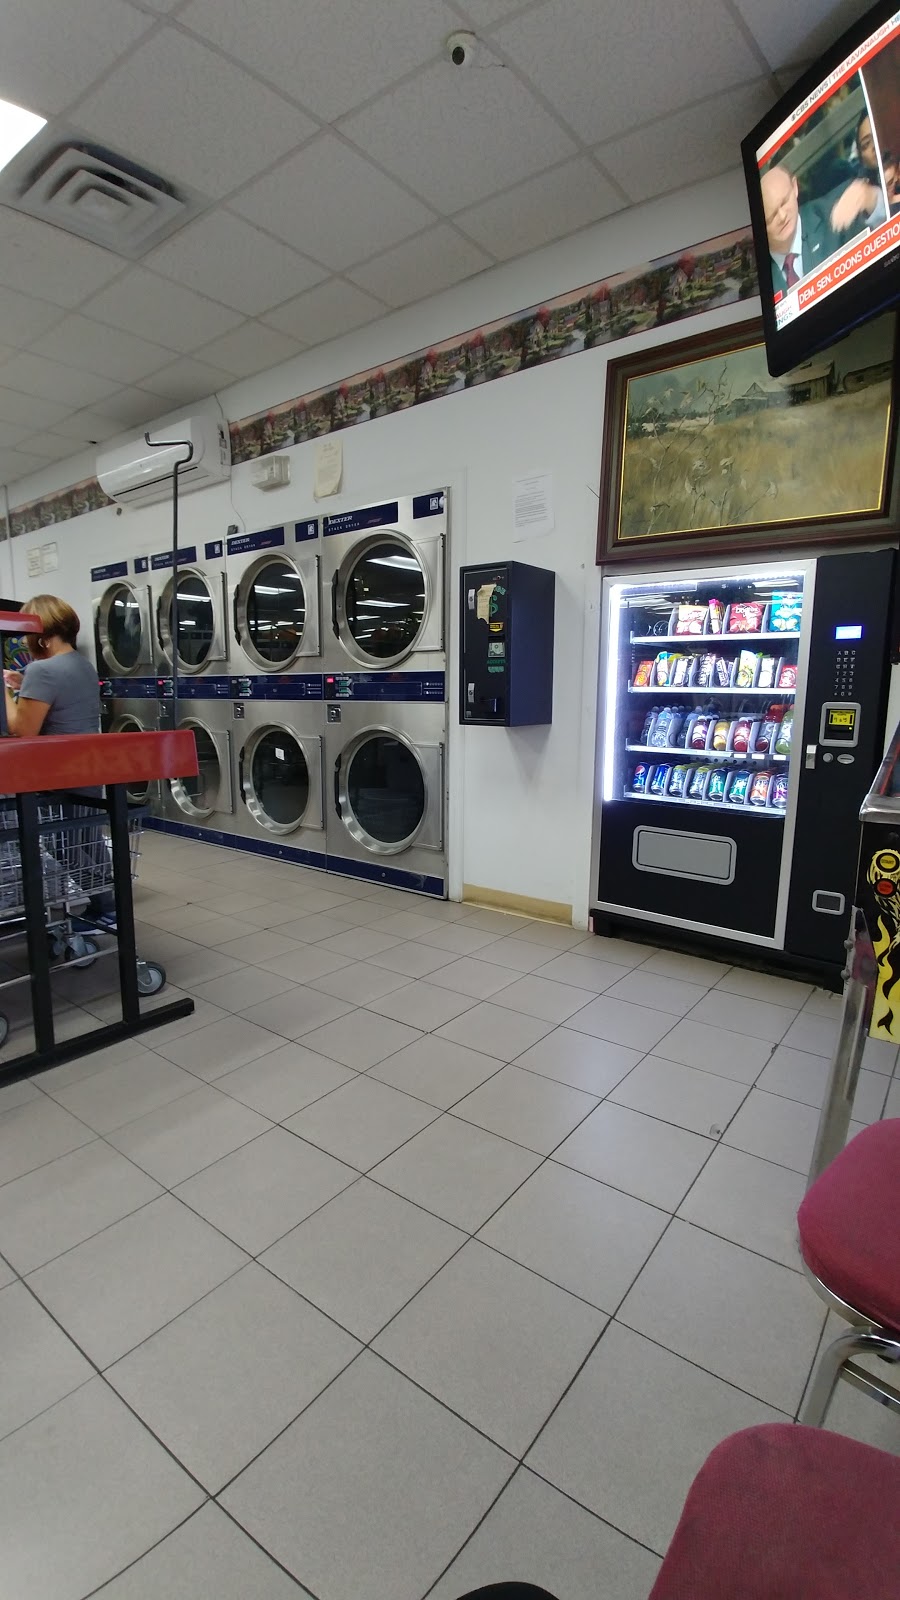 Delsea Laundromat and Dry Cleaners | 1185 S Delsea Dr #6207, Vineland, NJ 08360 | Phone: (856) 696-8287